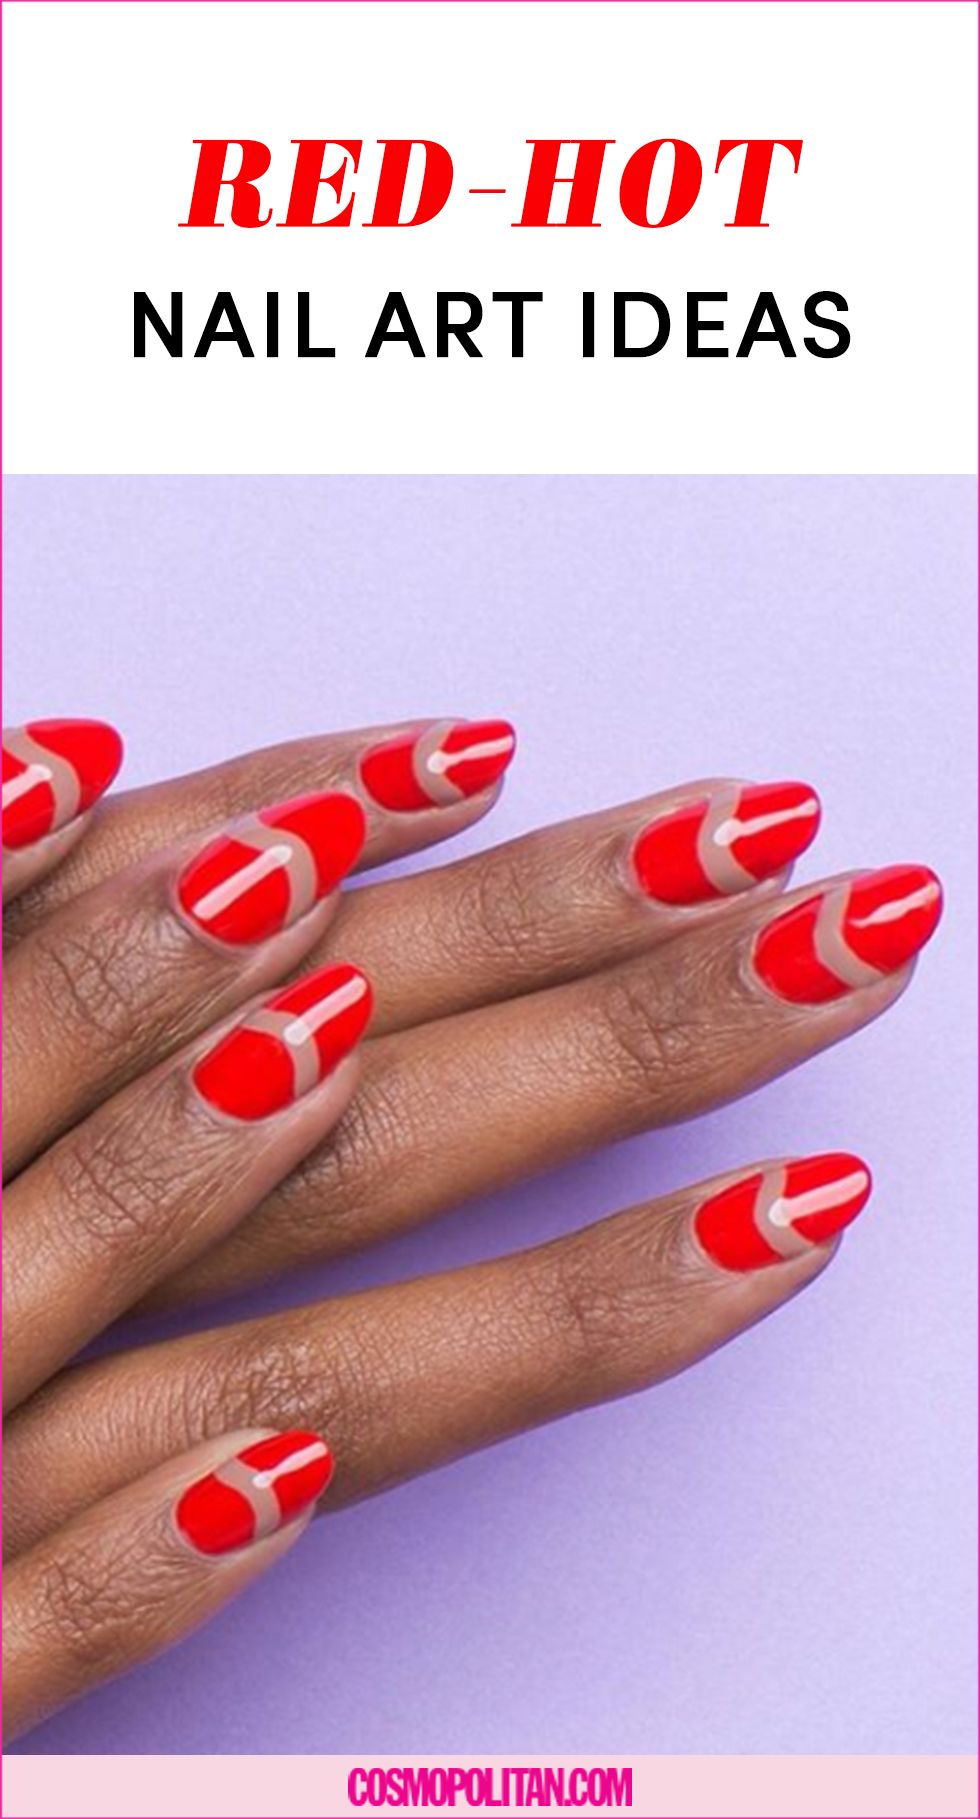 ❤️💅✨ Simply Beautiful: White Nails with Red Heart Highlights ❤️💅✨ | by  Nailkicks | Medium